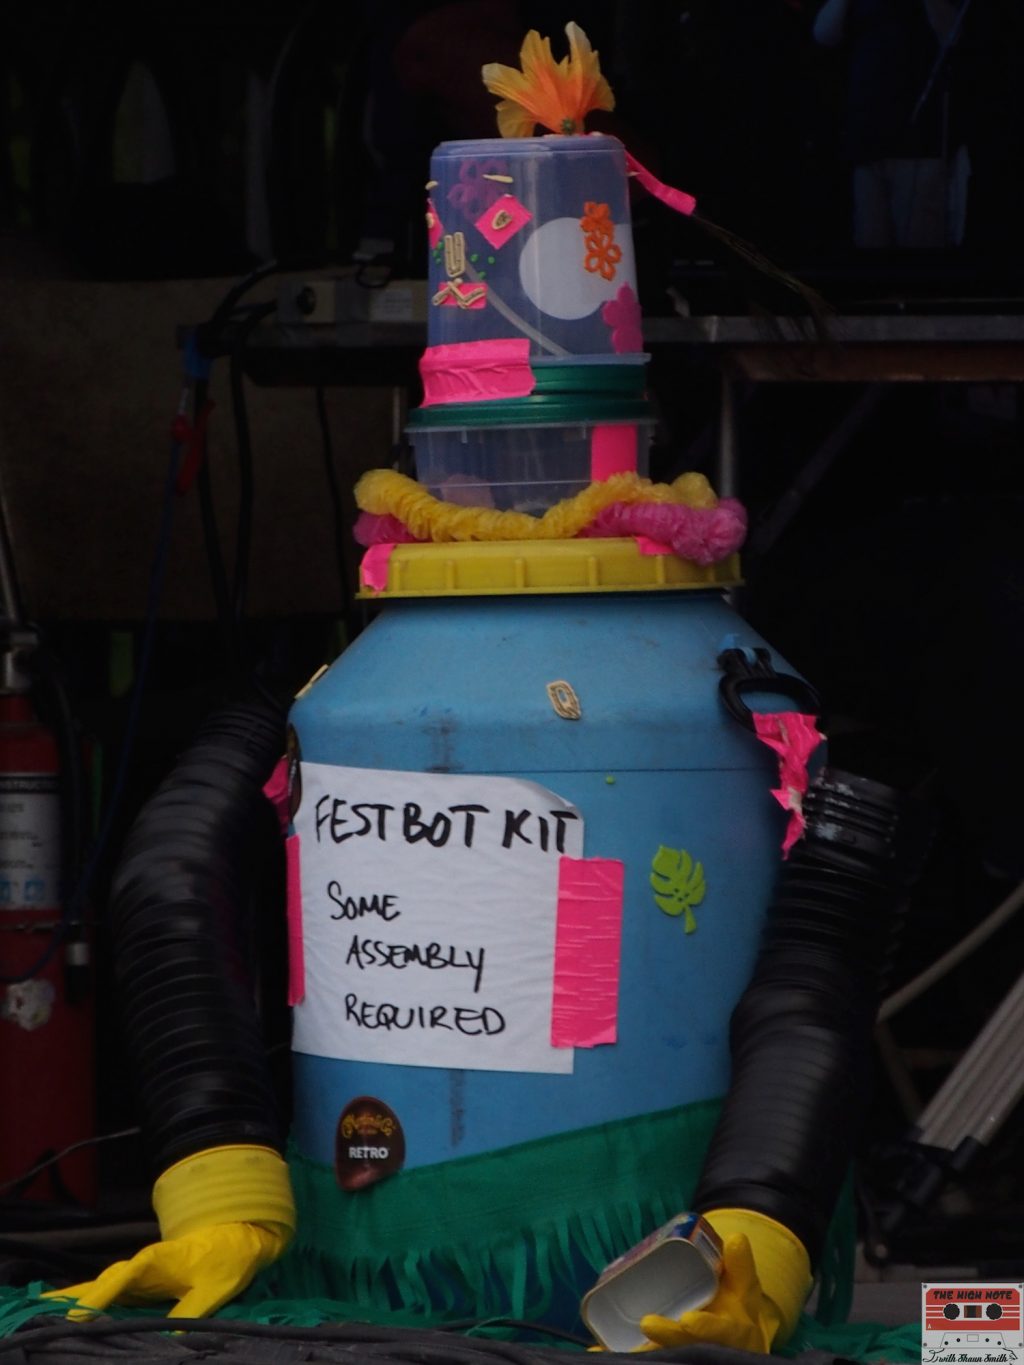 FestBot is prepared to travel to other music festivals after the 54th annual Philadelphia Folk Festival.